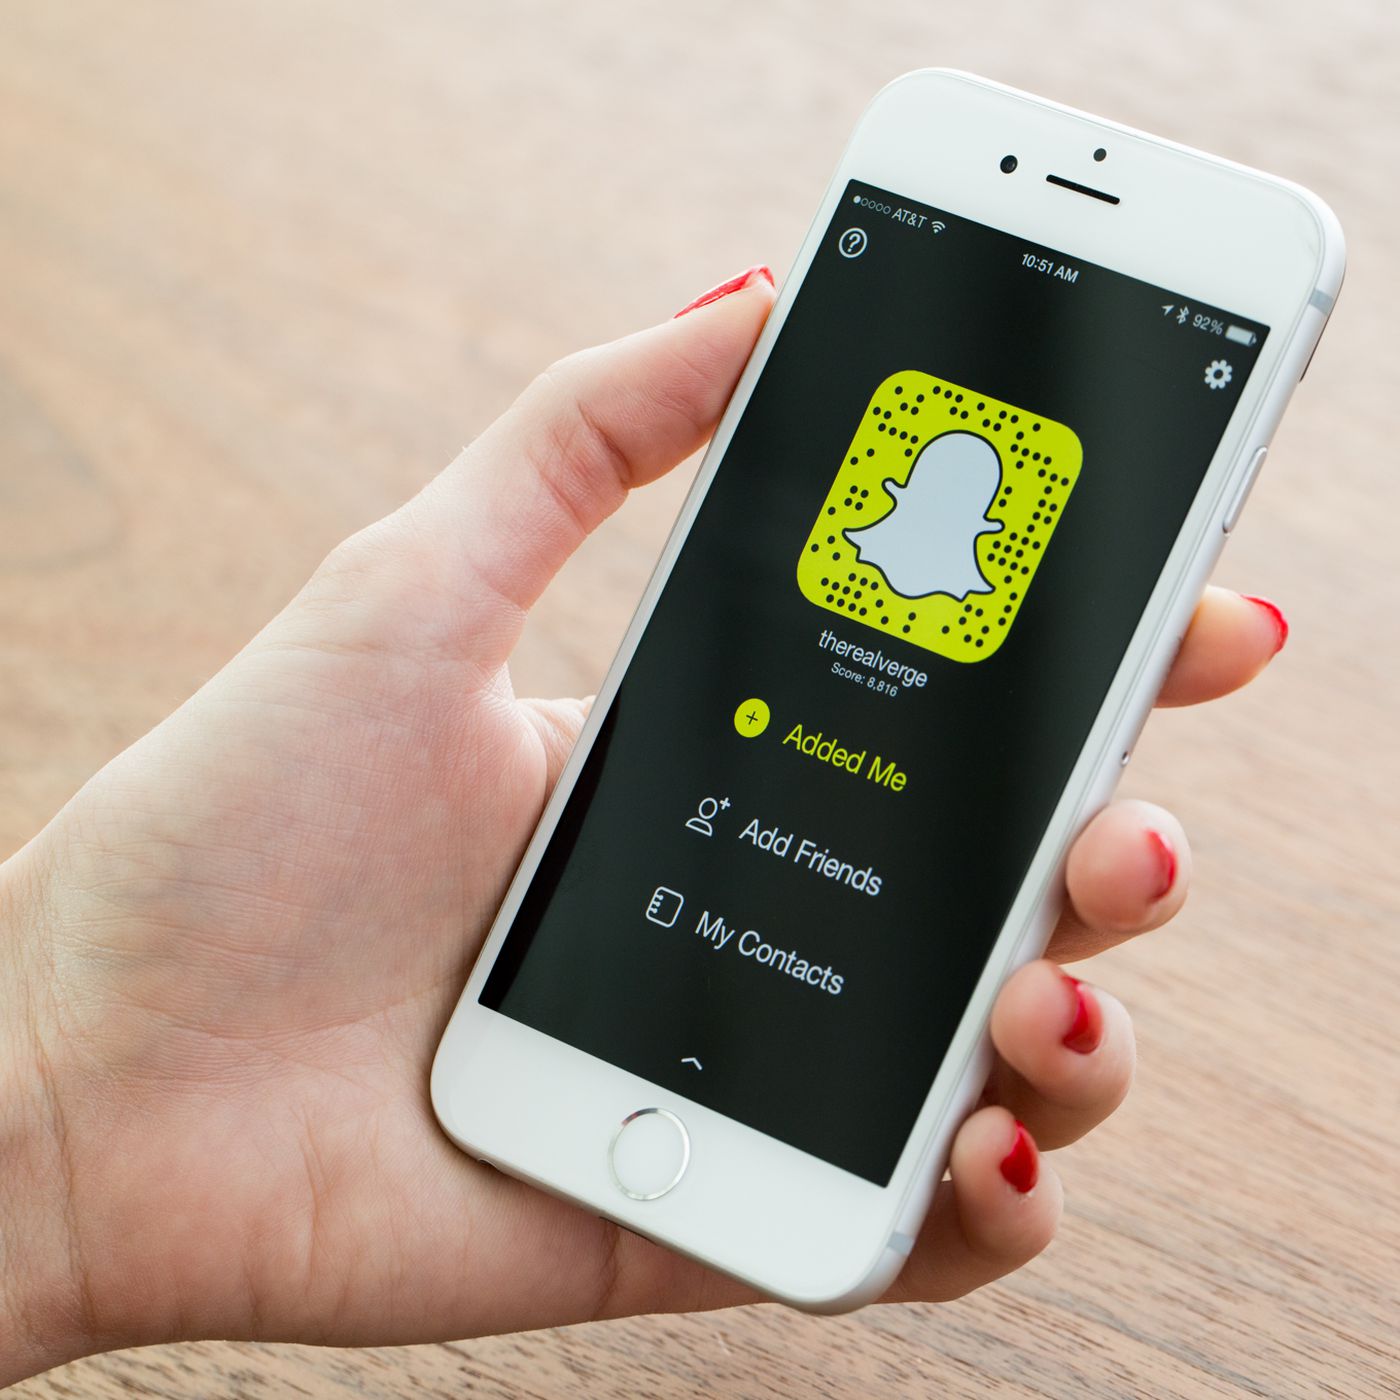 How to Add Someone on Snapchat by Phone Number